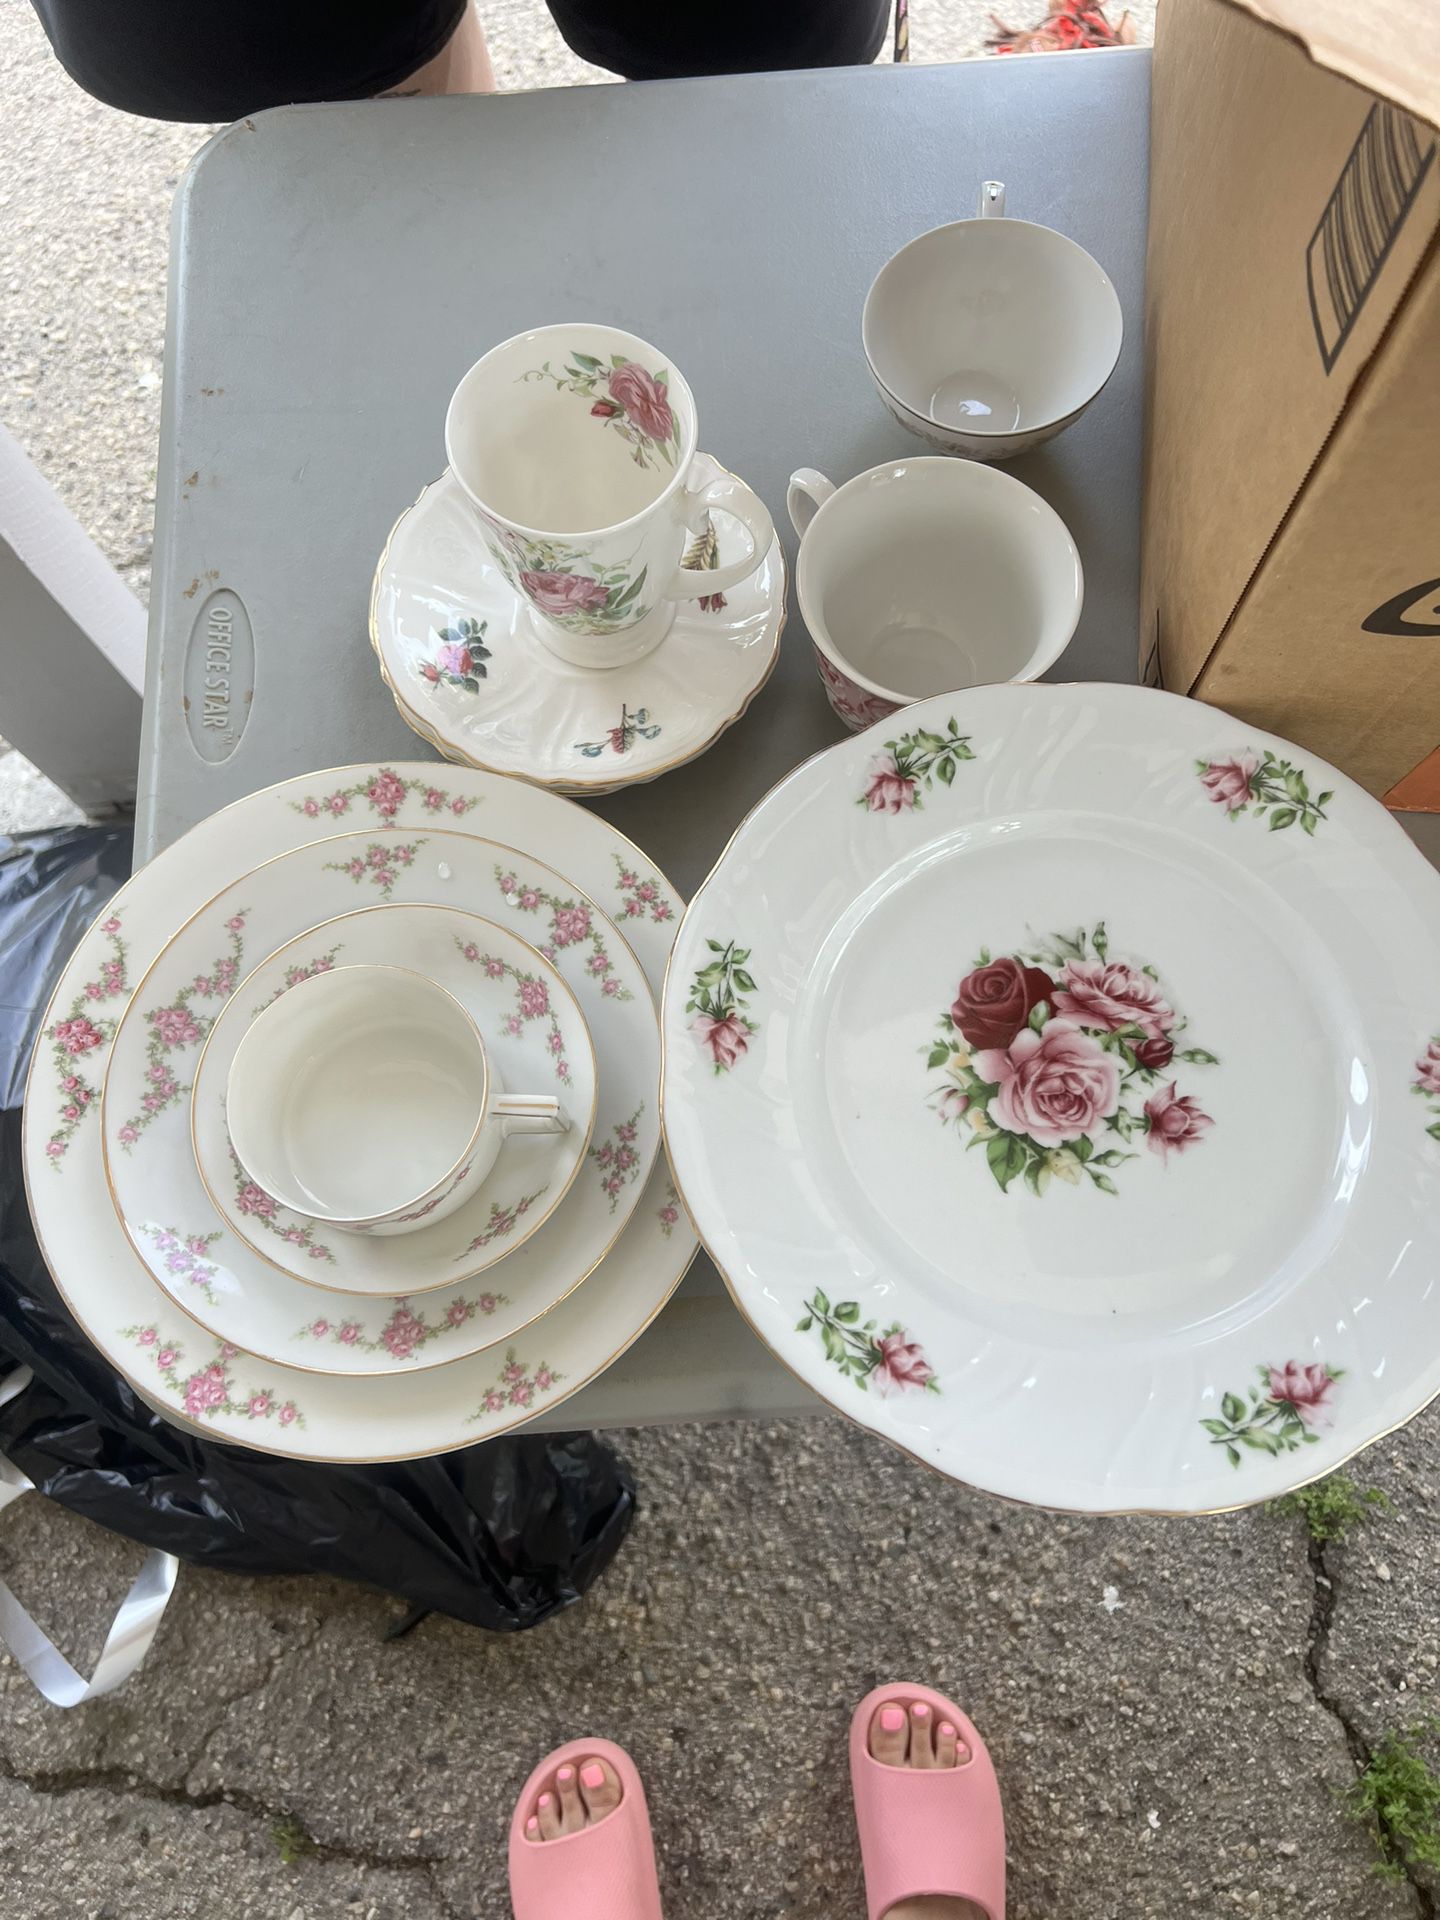 Bridal Shower Decor Mixed pink China Wear $500 Or best offer